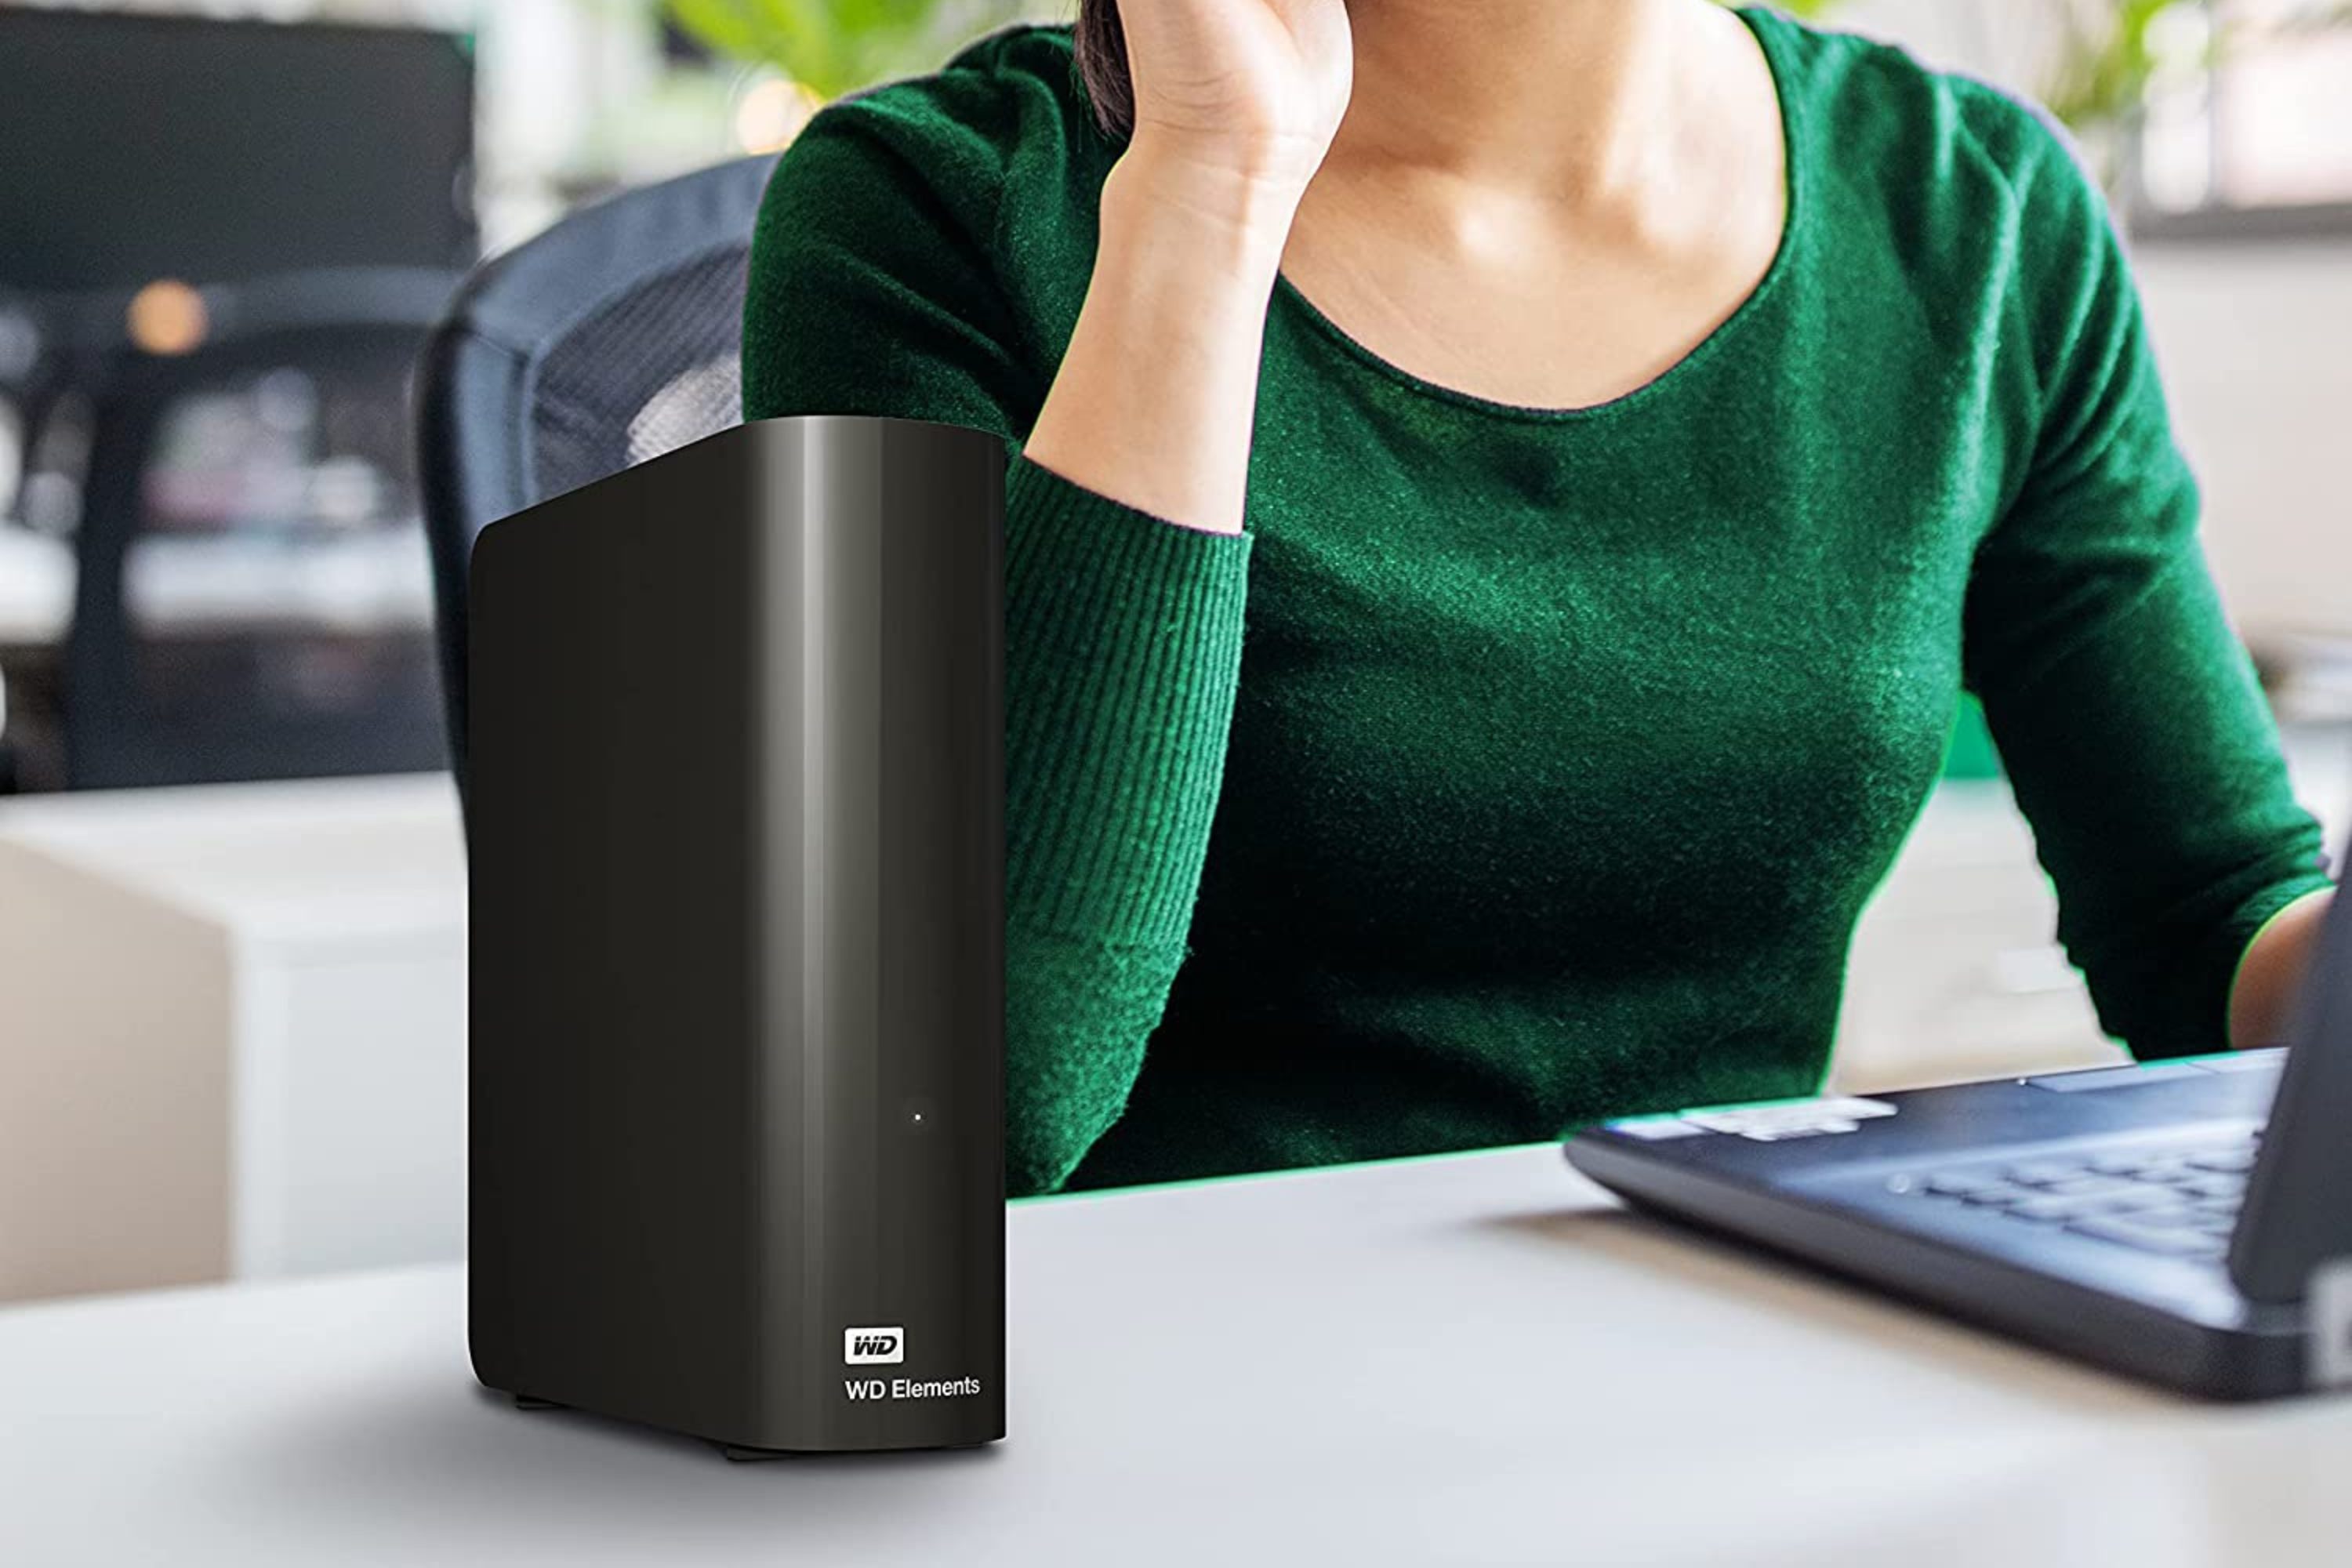 WD external drive elements in front of person 